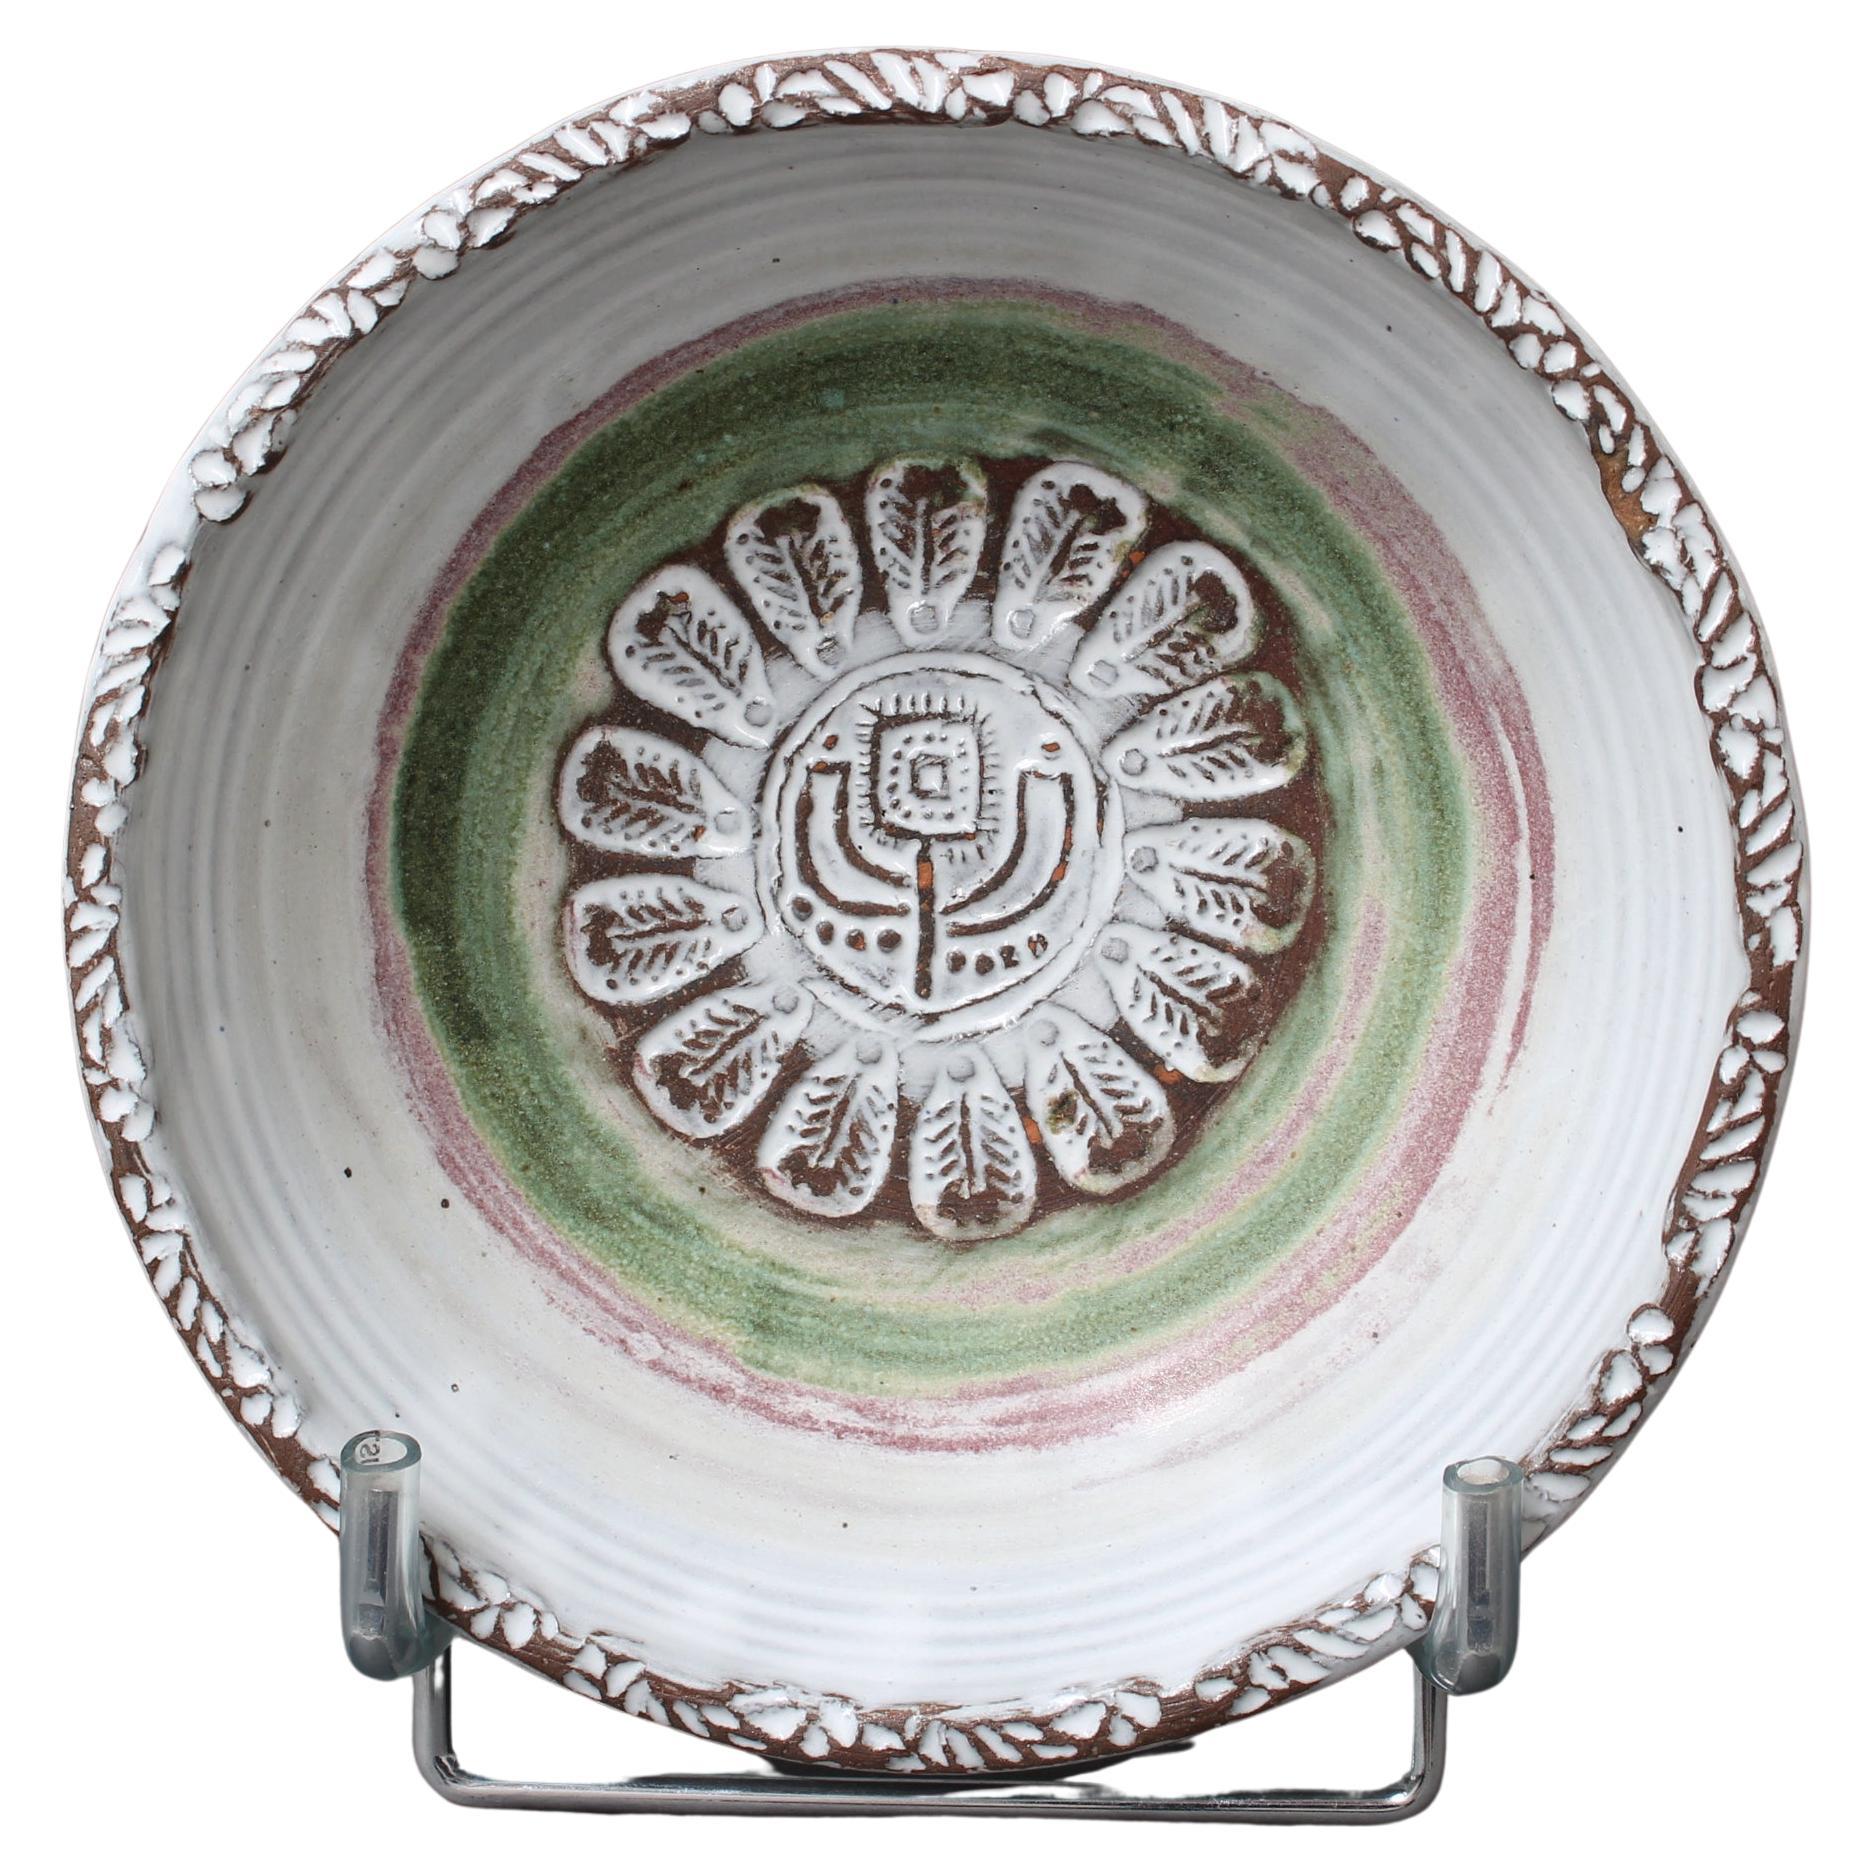 Vintage French Decorative Ceramic Bowl by Albert Thiry (circa 1960s) - Small For Sale